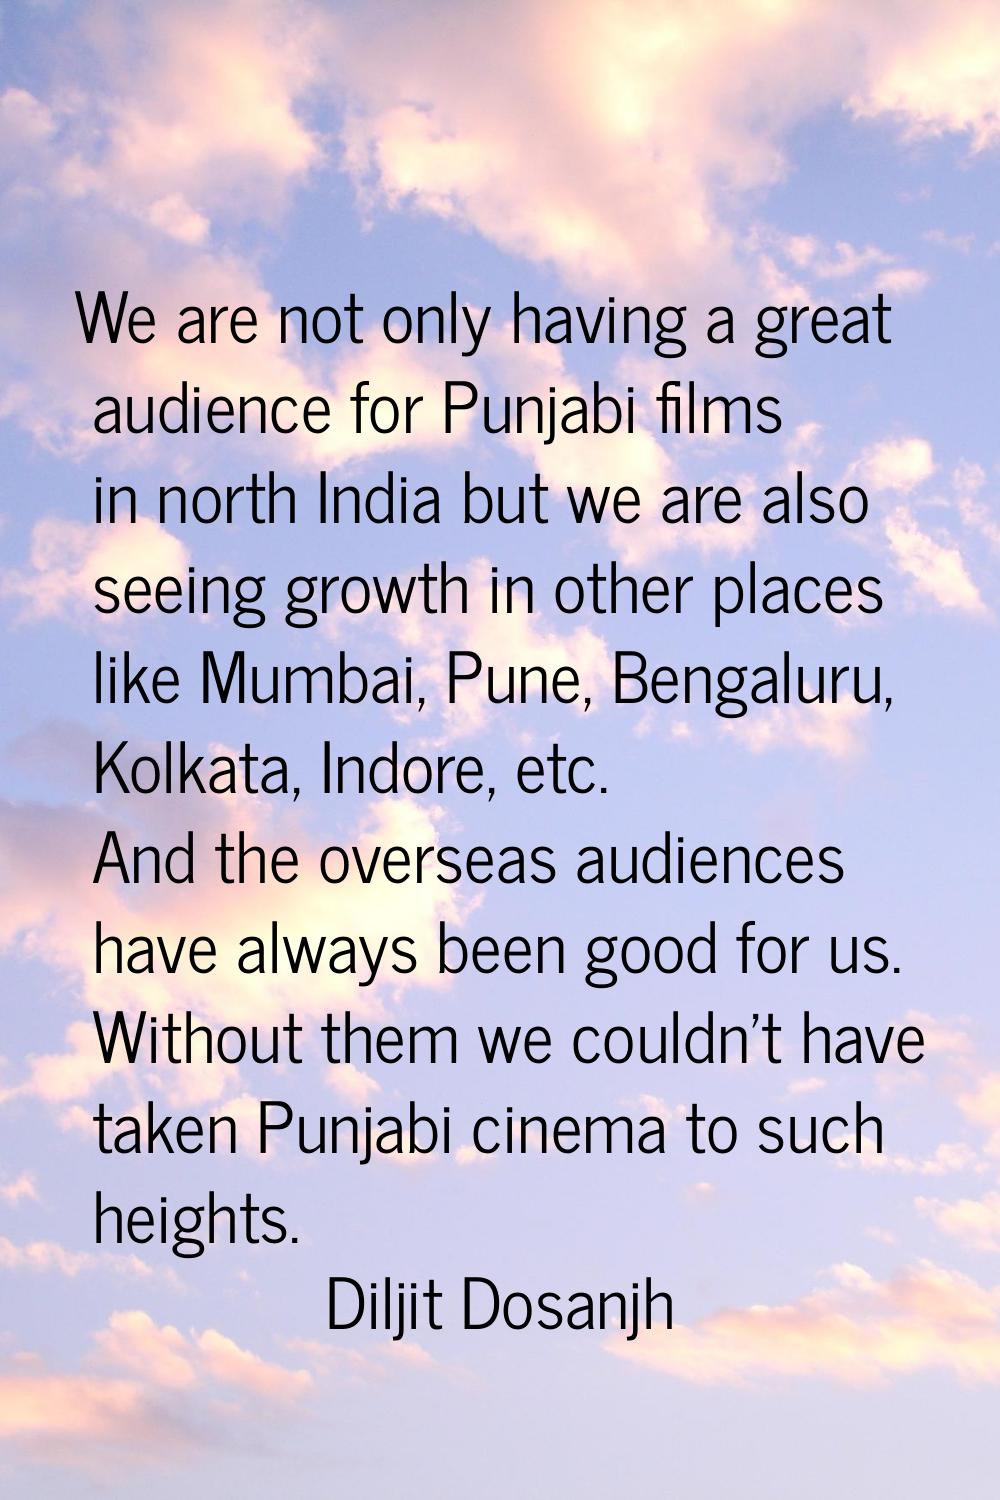 We are not only having a great audience for Punjabi films in north India but we are also seeing gro